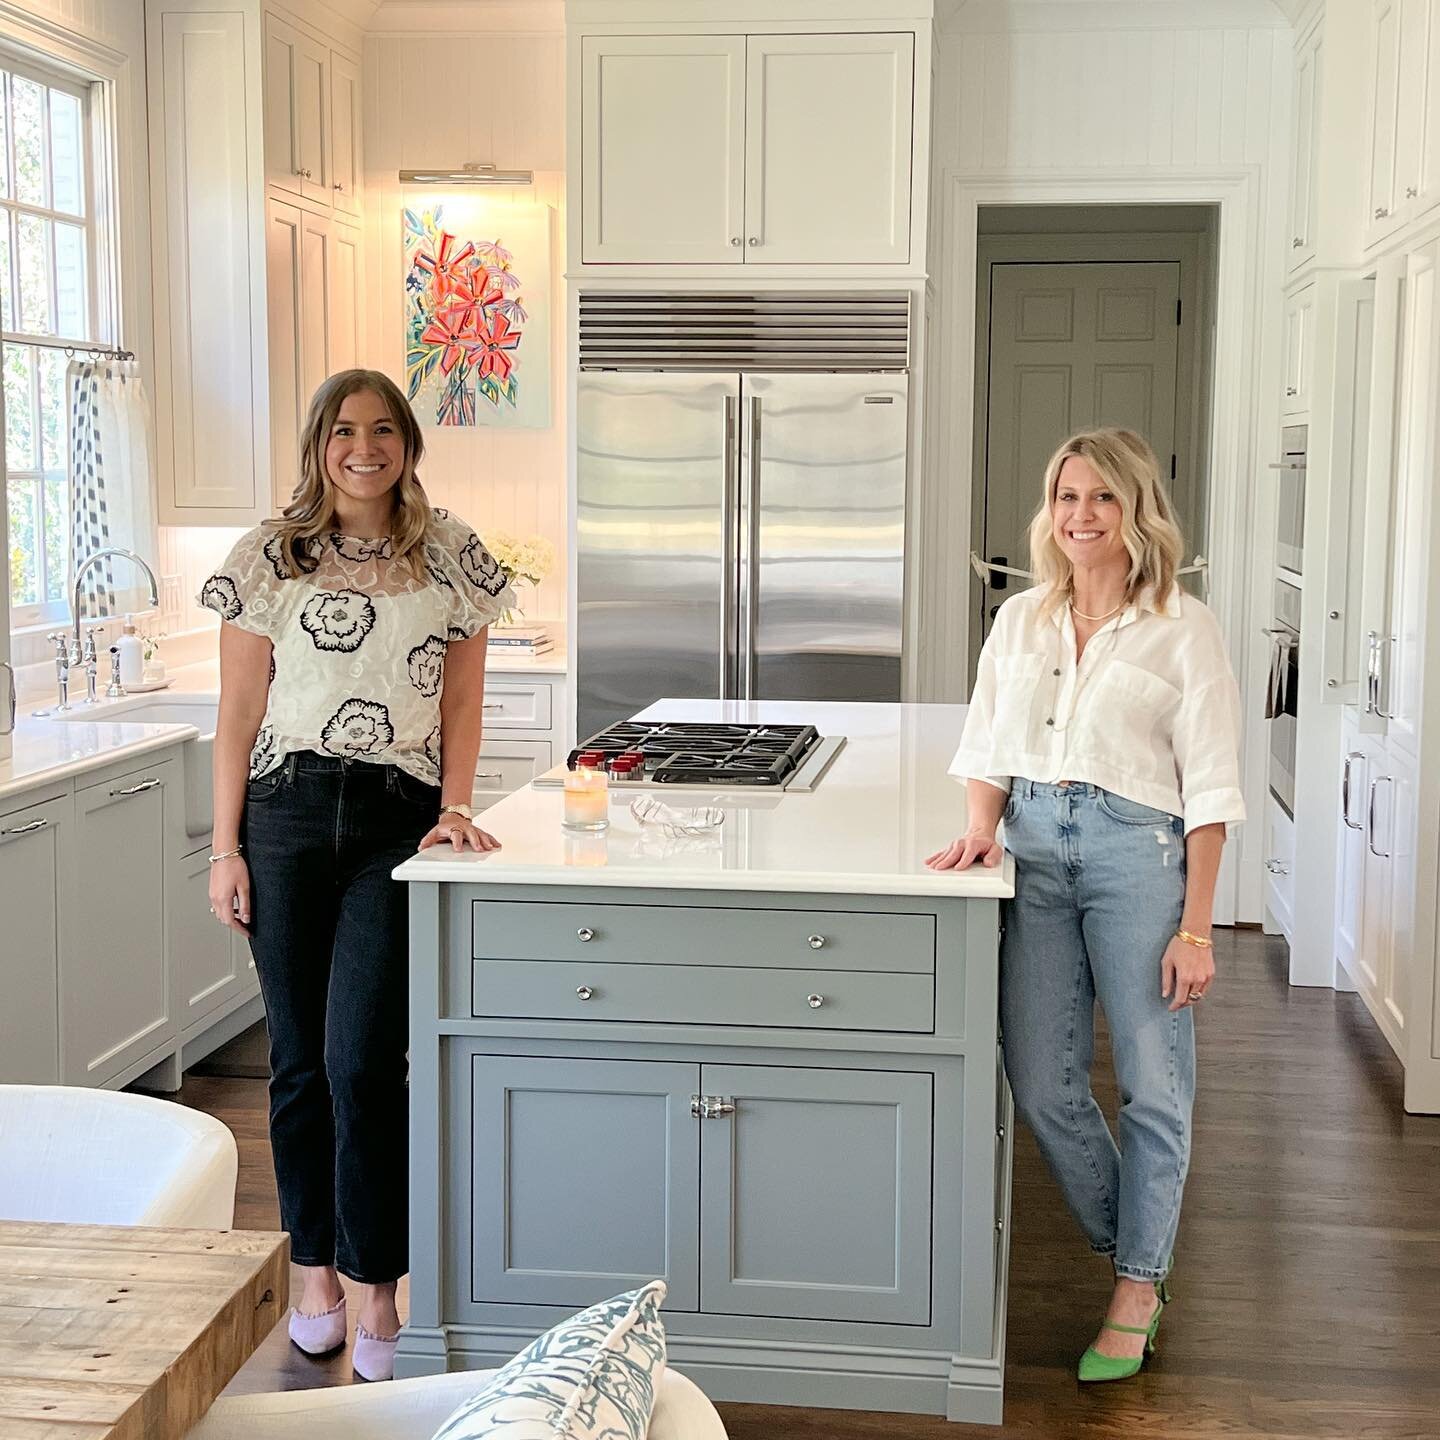 @ryan_foxx2 &amp; I designed this pretty kitchen and loved hanging in it all day for the @atlantahomesmag Tour of Kitchens! It was a treat meeting some of you and being surrounded by fellow kitchen lovers all day 😊